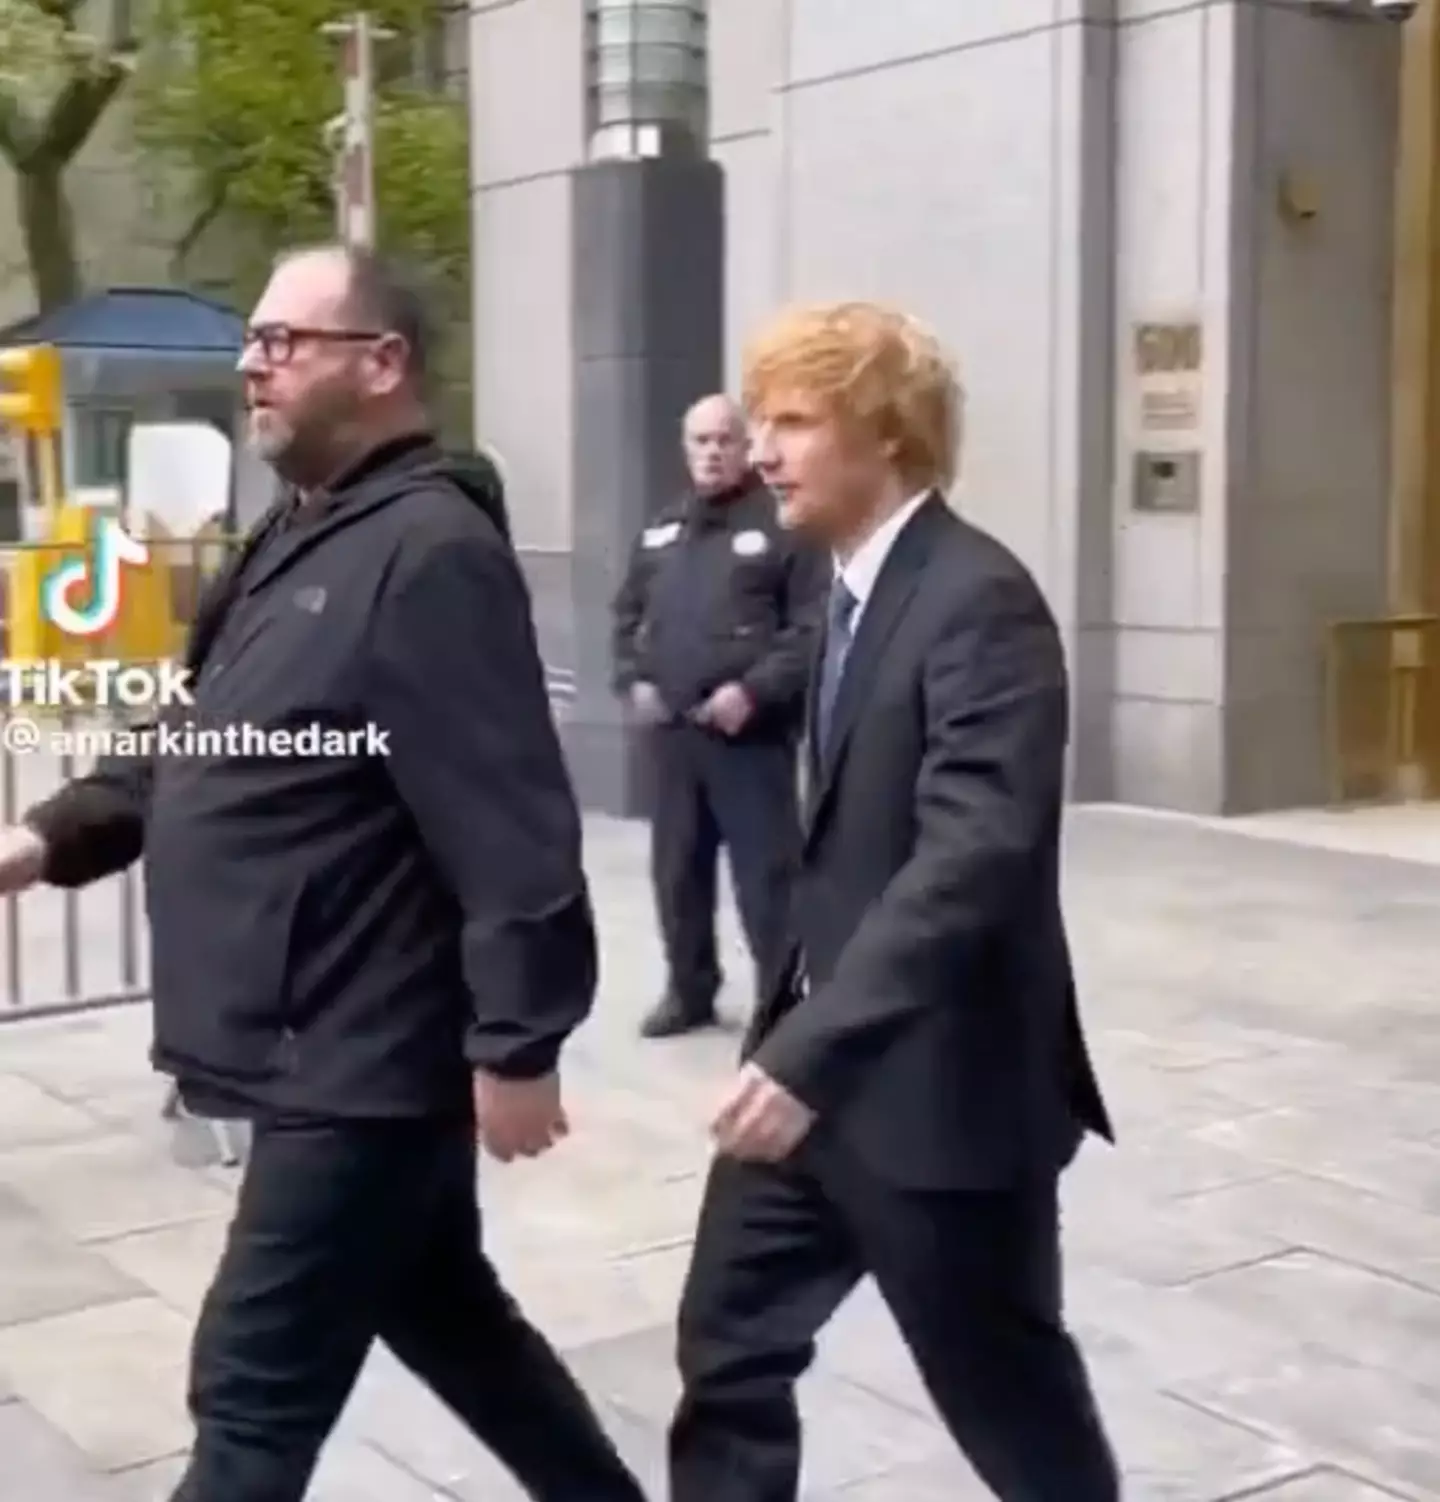 Ed Sheeran must have been happy leaving the court.